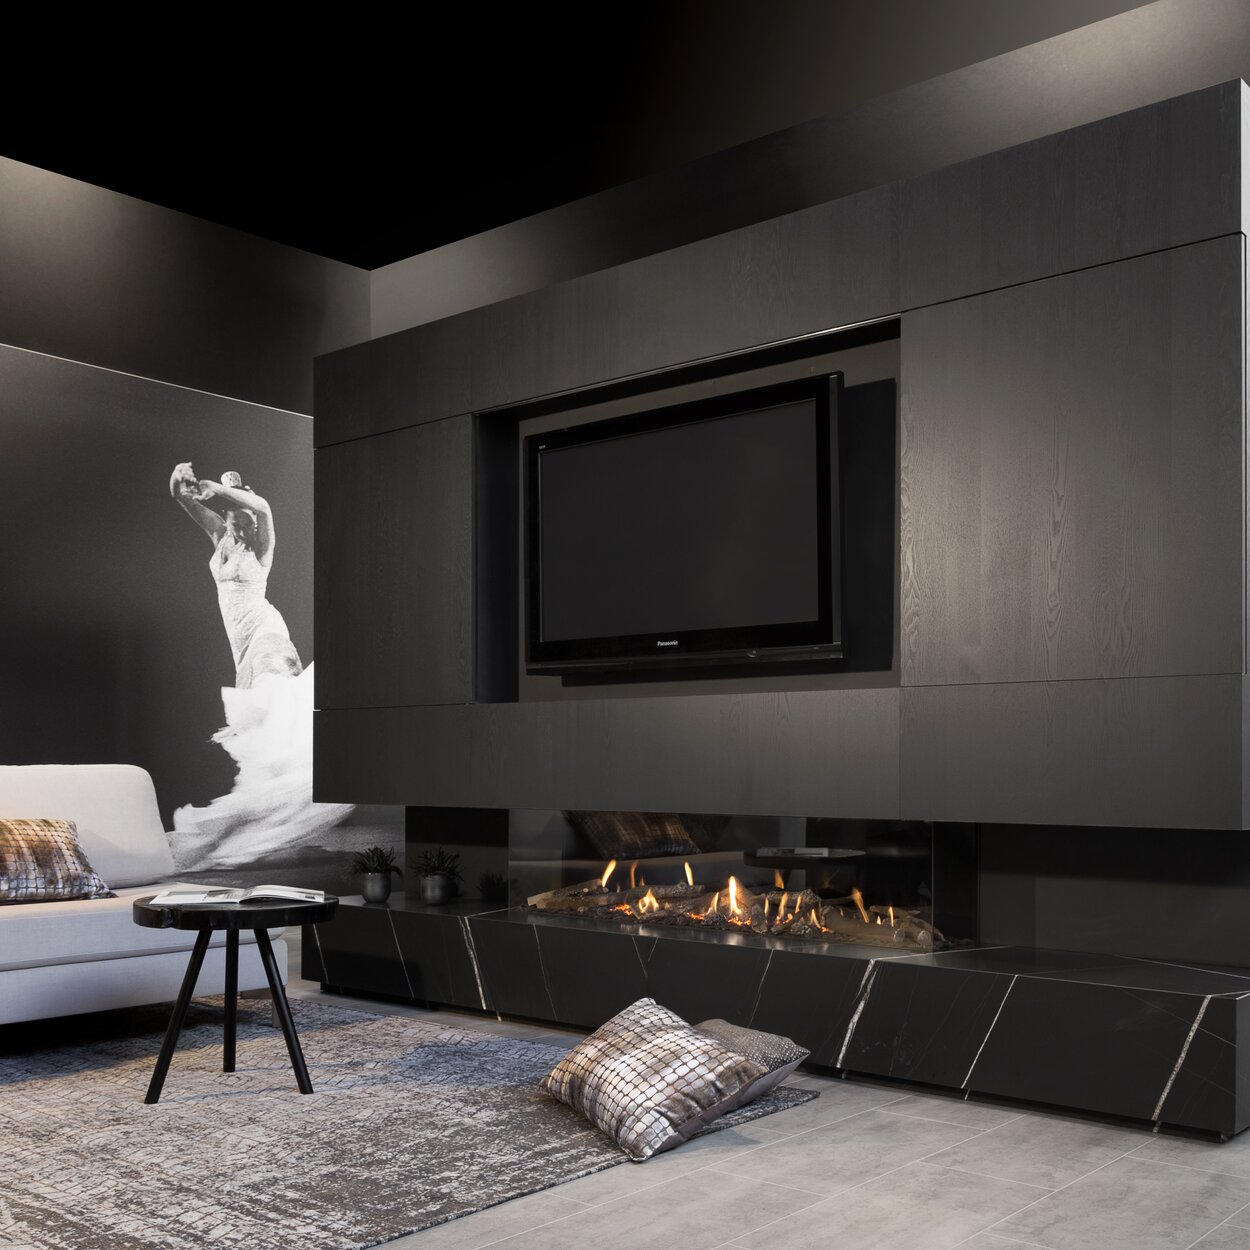 Gas fireplace G170/37S glazed on 3-sided built into black wall unit with integrated TV in modern living room